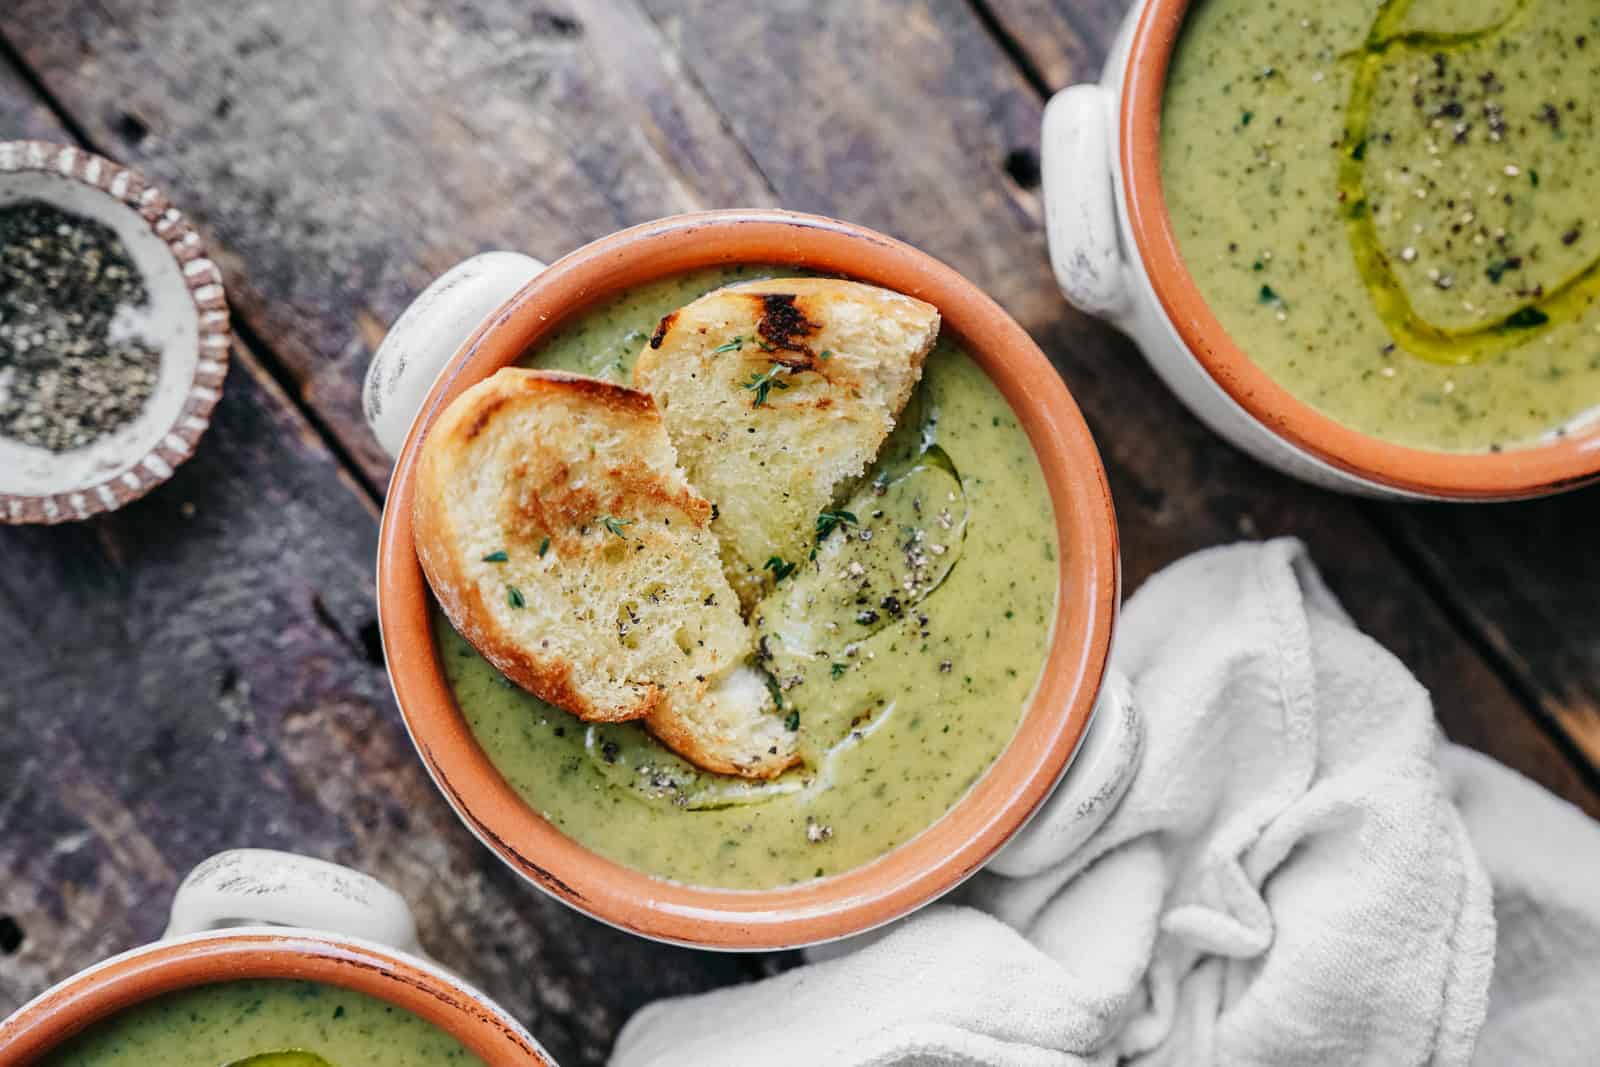 A comforting bowl of Vegan Broccoli Soup sitting on wooden table and topped with 2 slices of toasted bread.